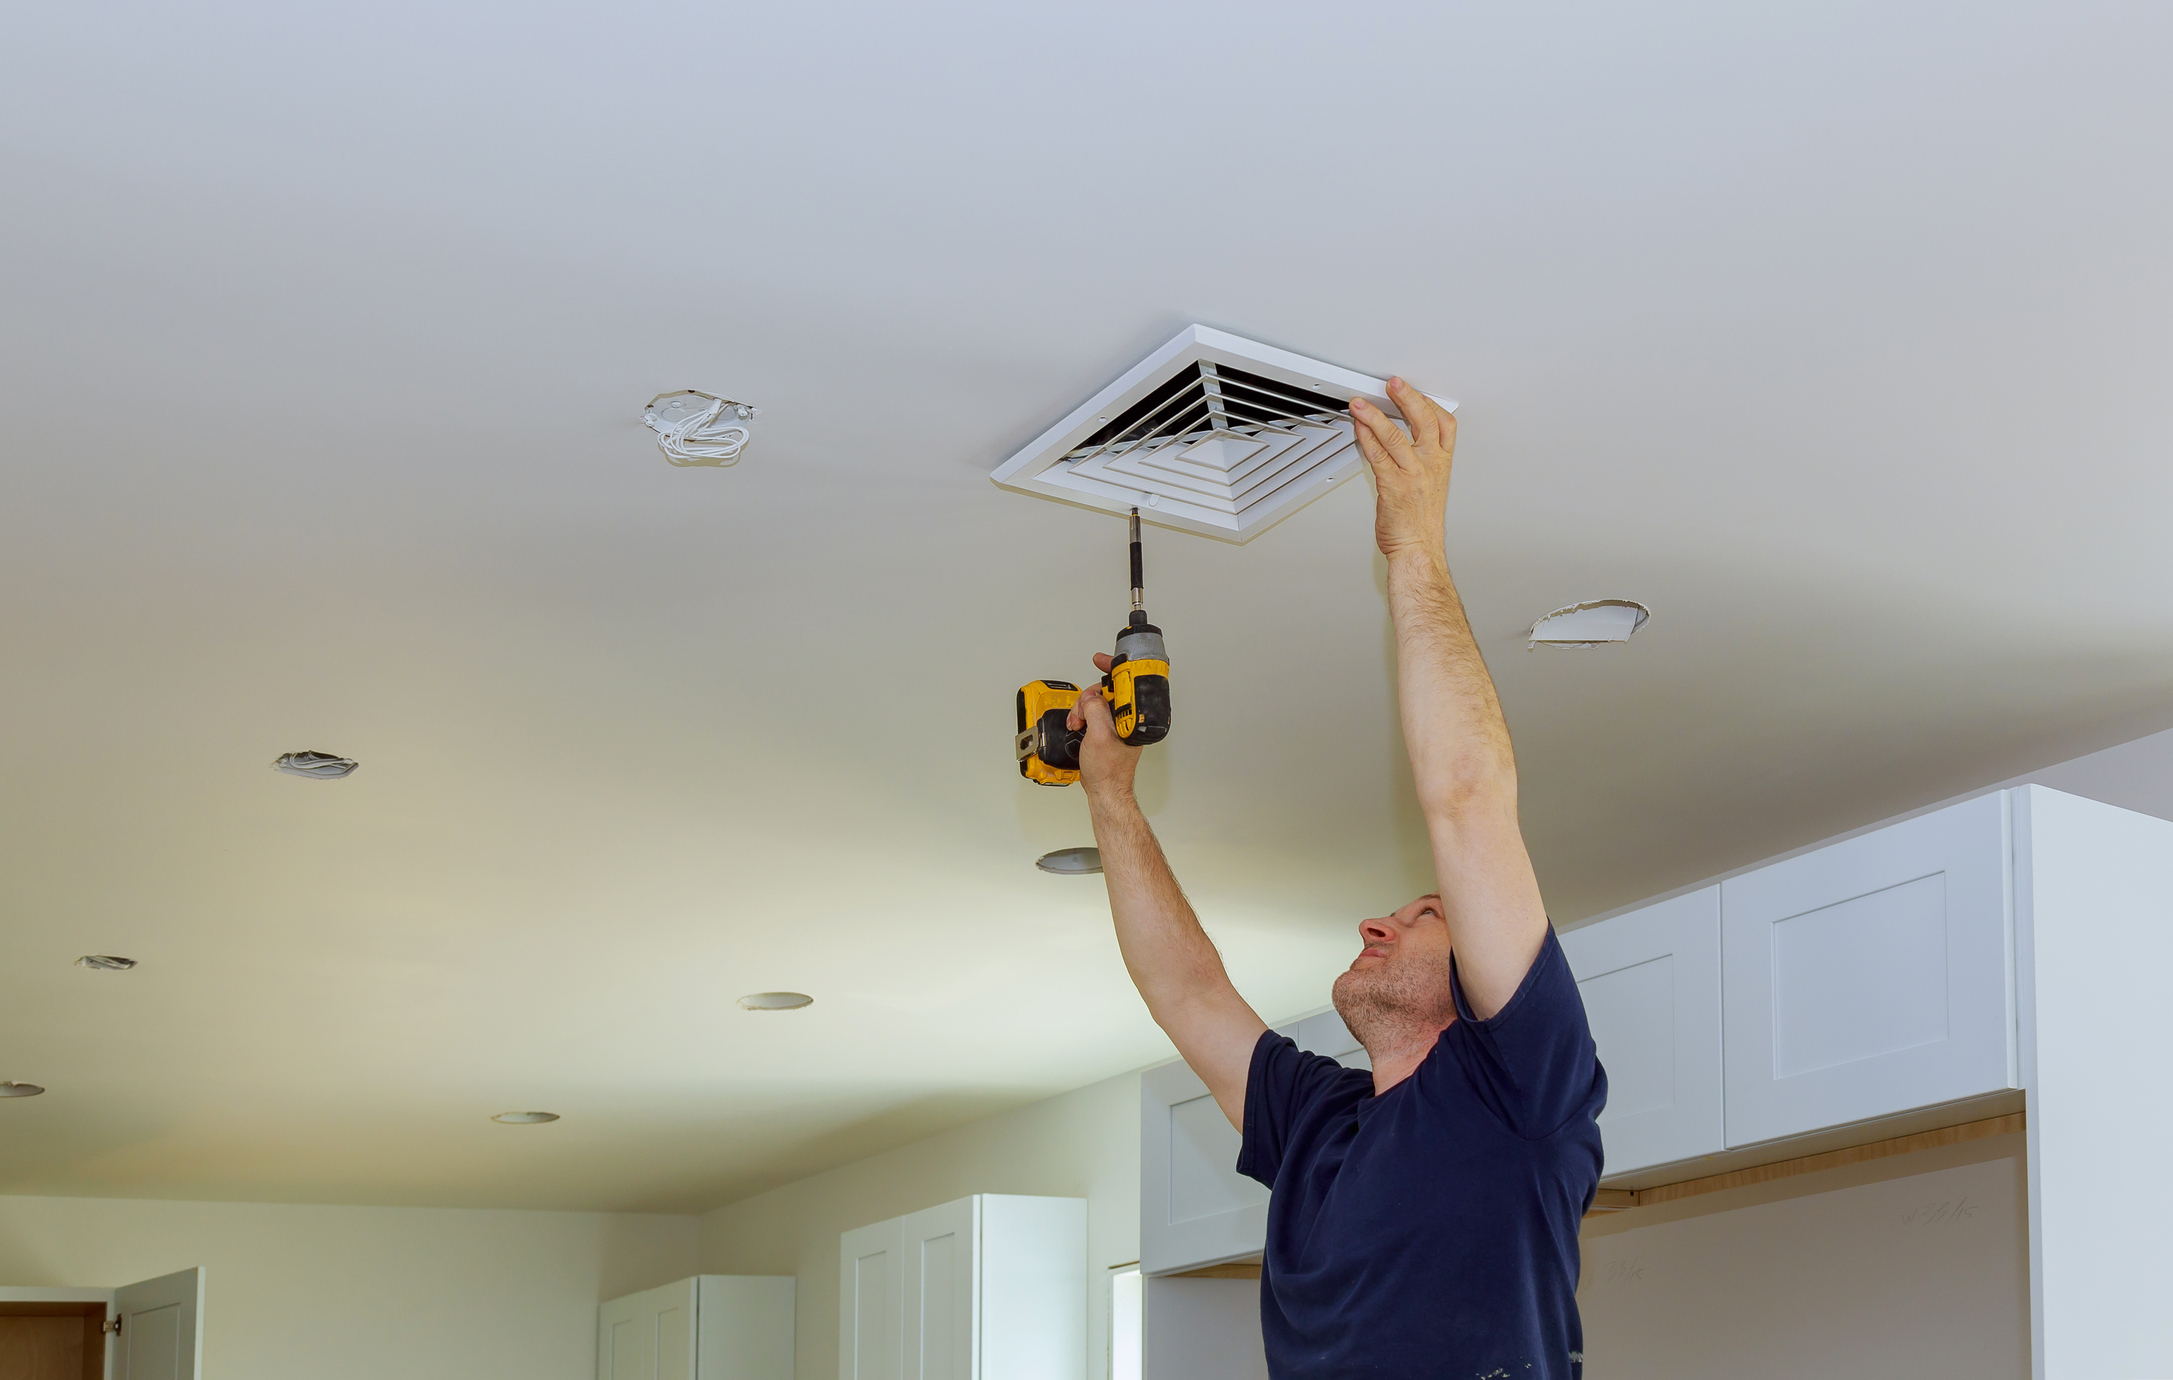 Lifestyle image of a man replacing the cover of his exhaust fan